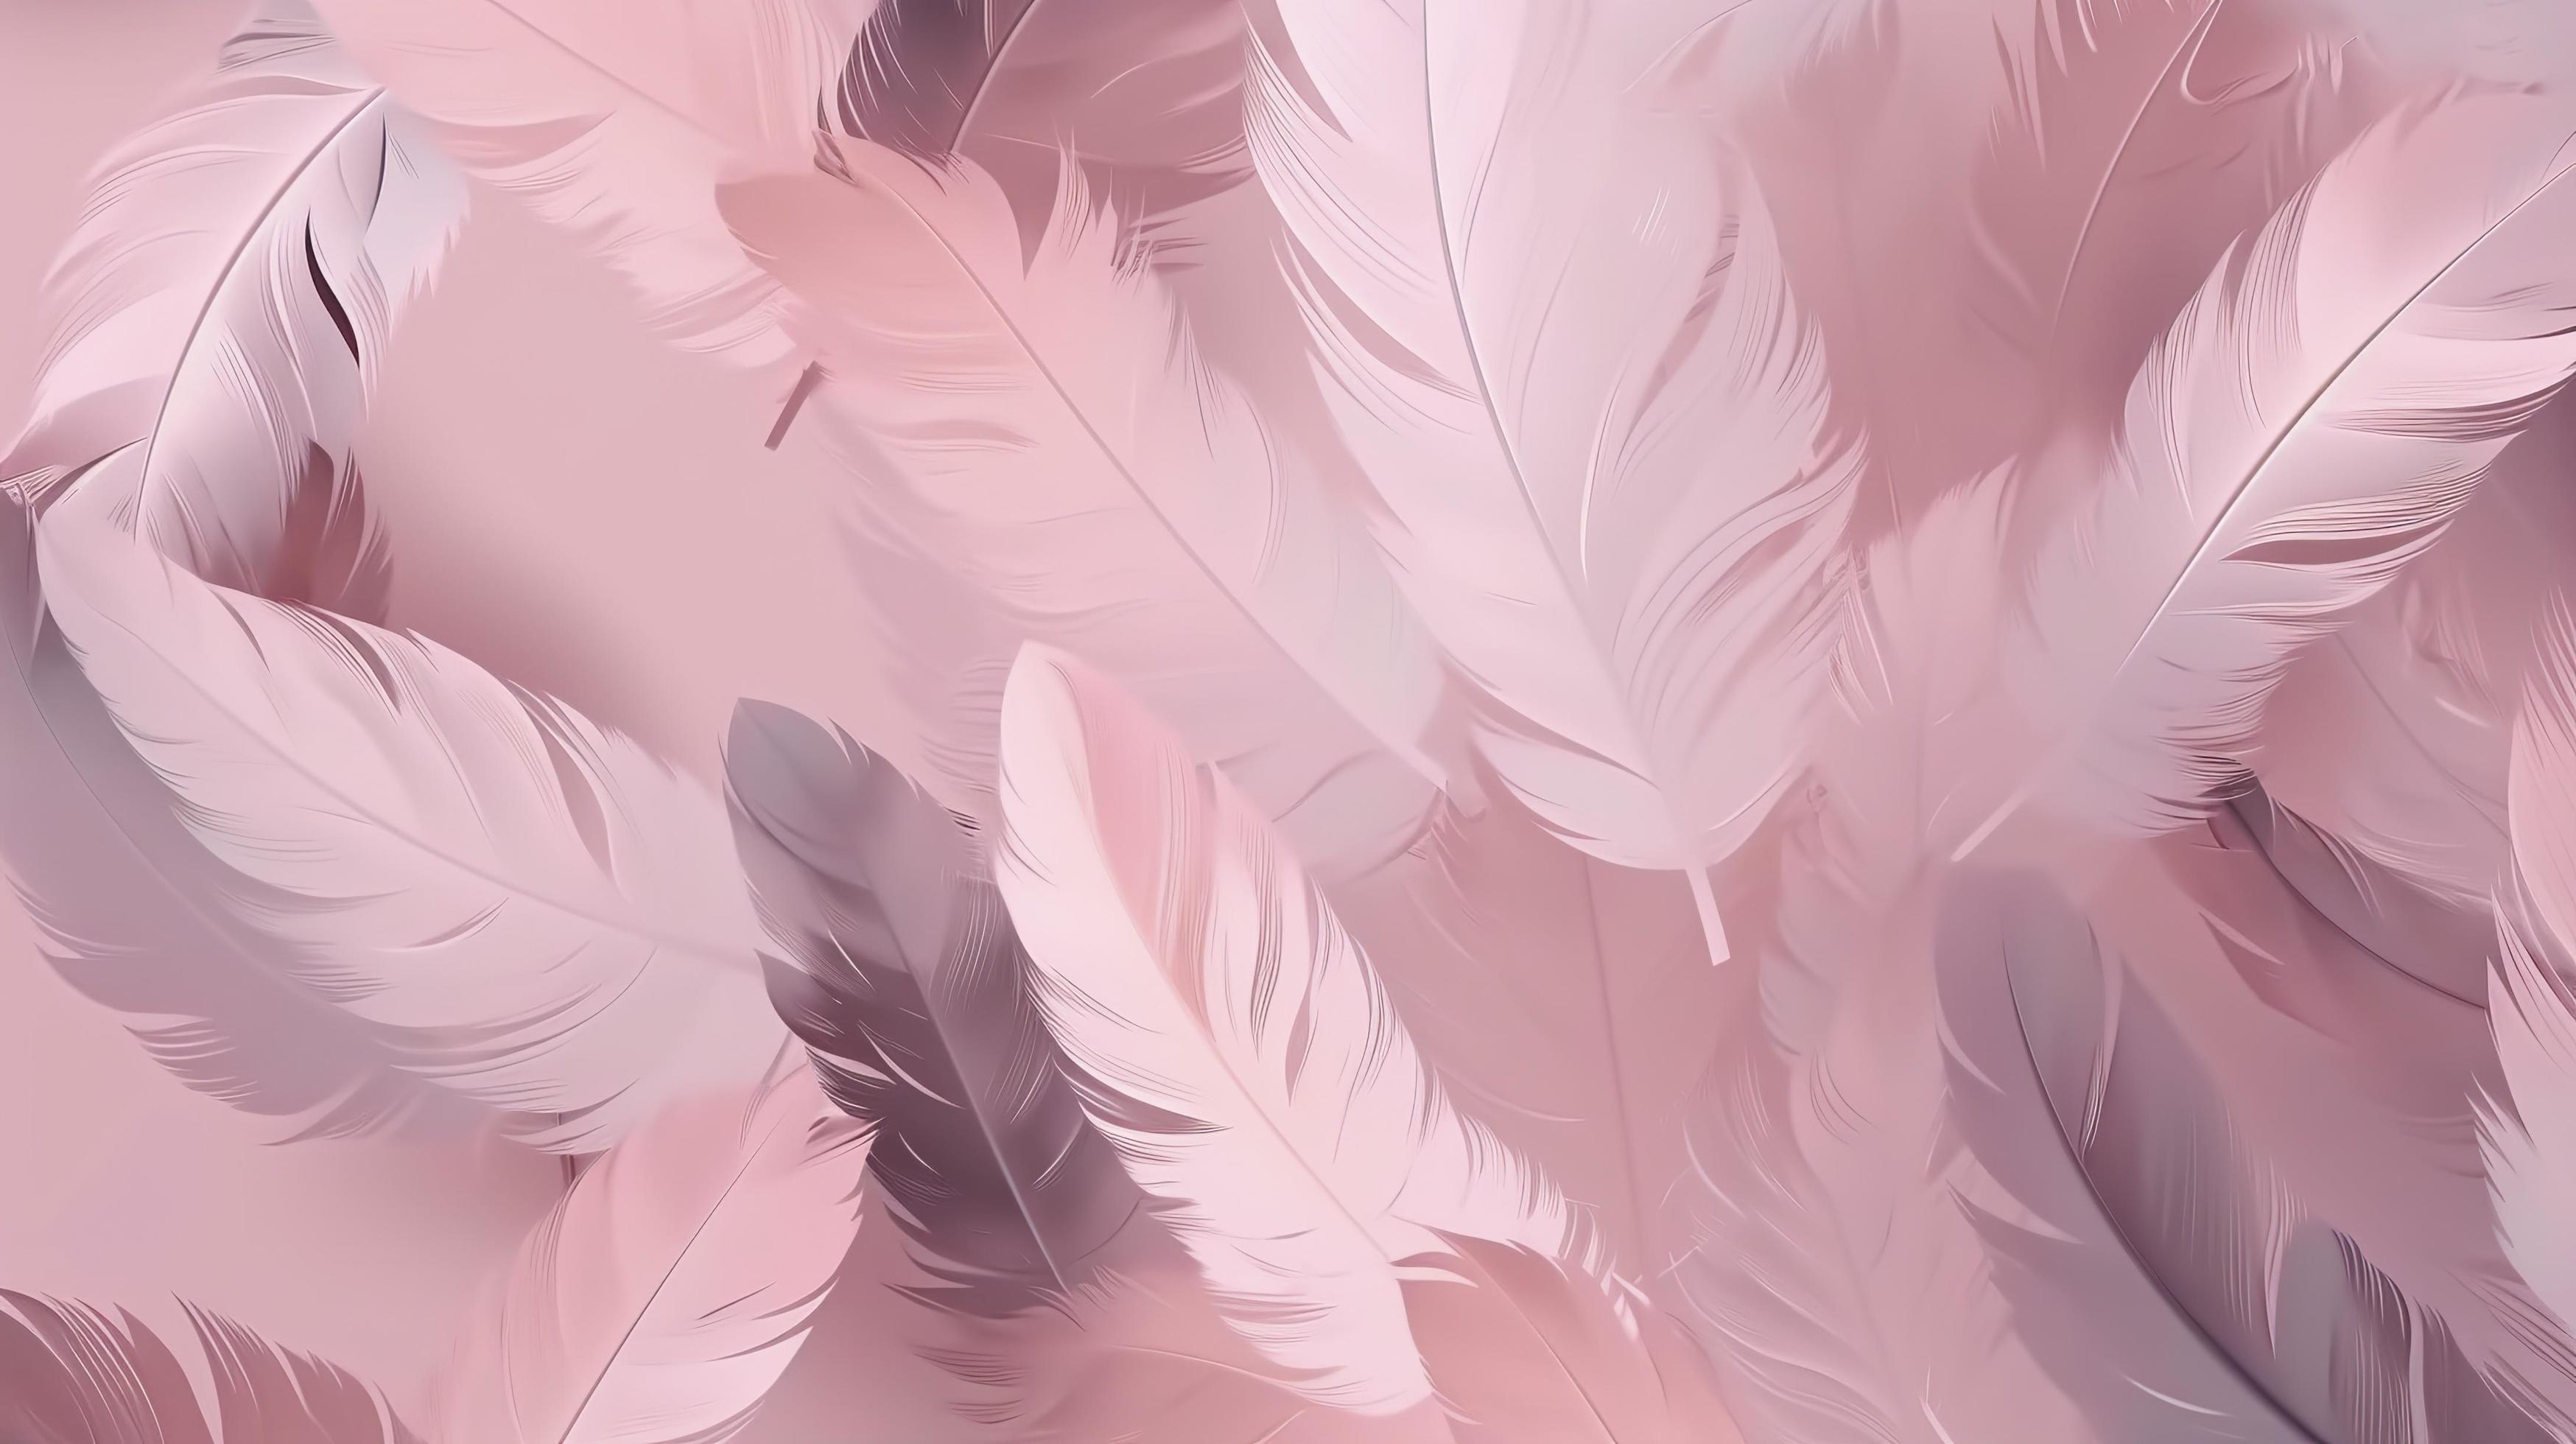 A pink and purple feather wallpaper - Feathers